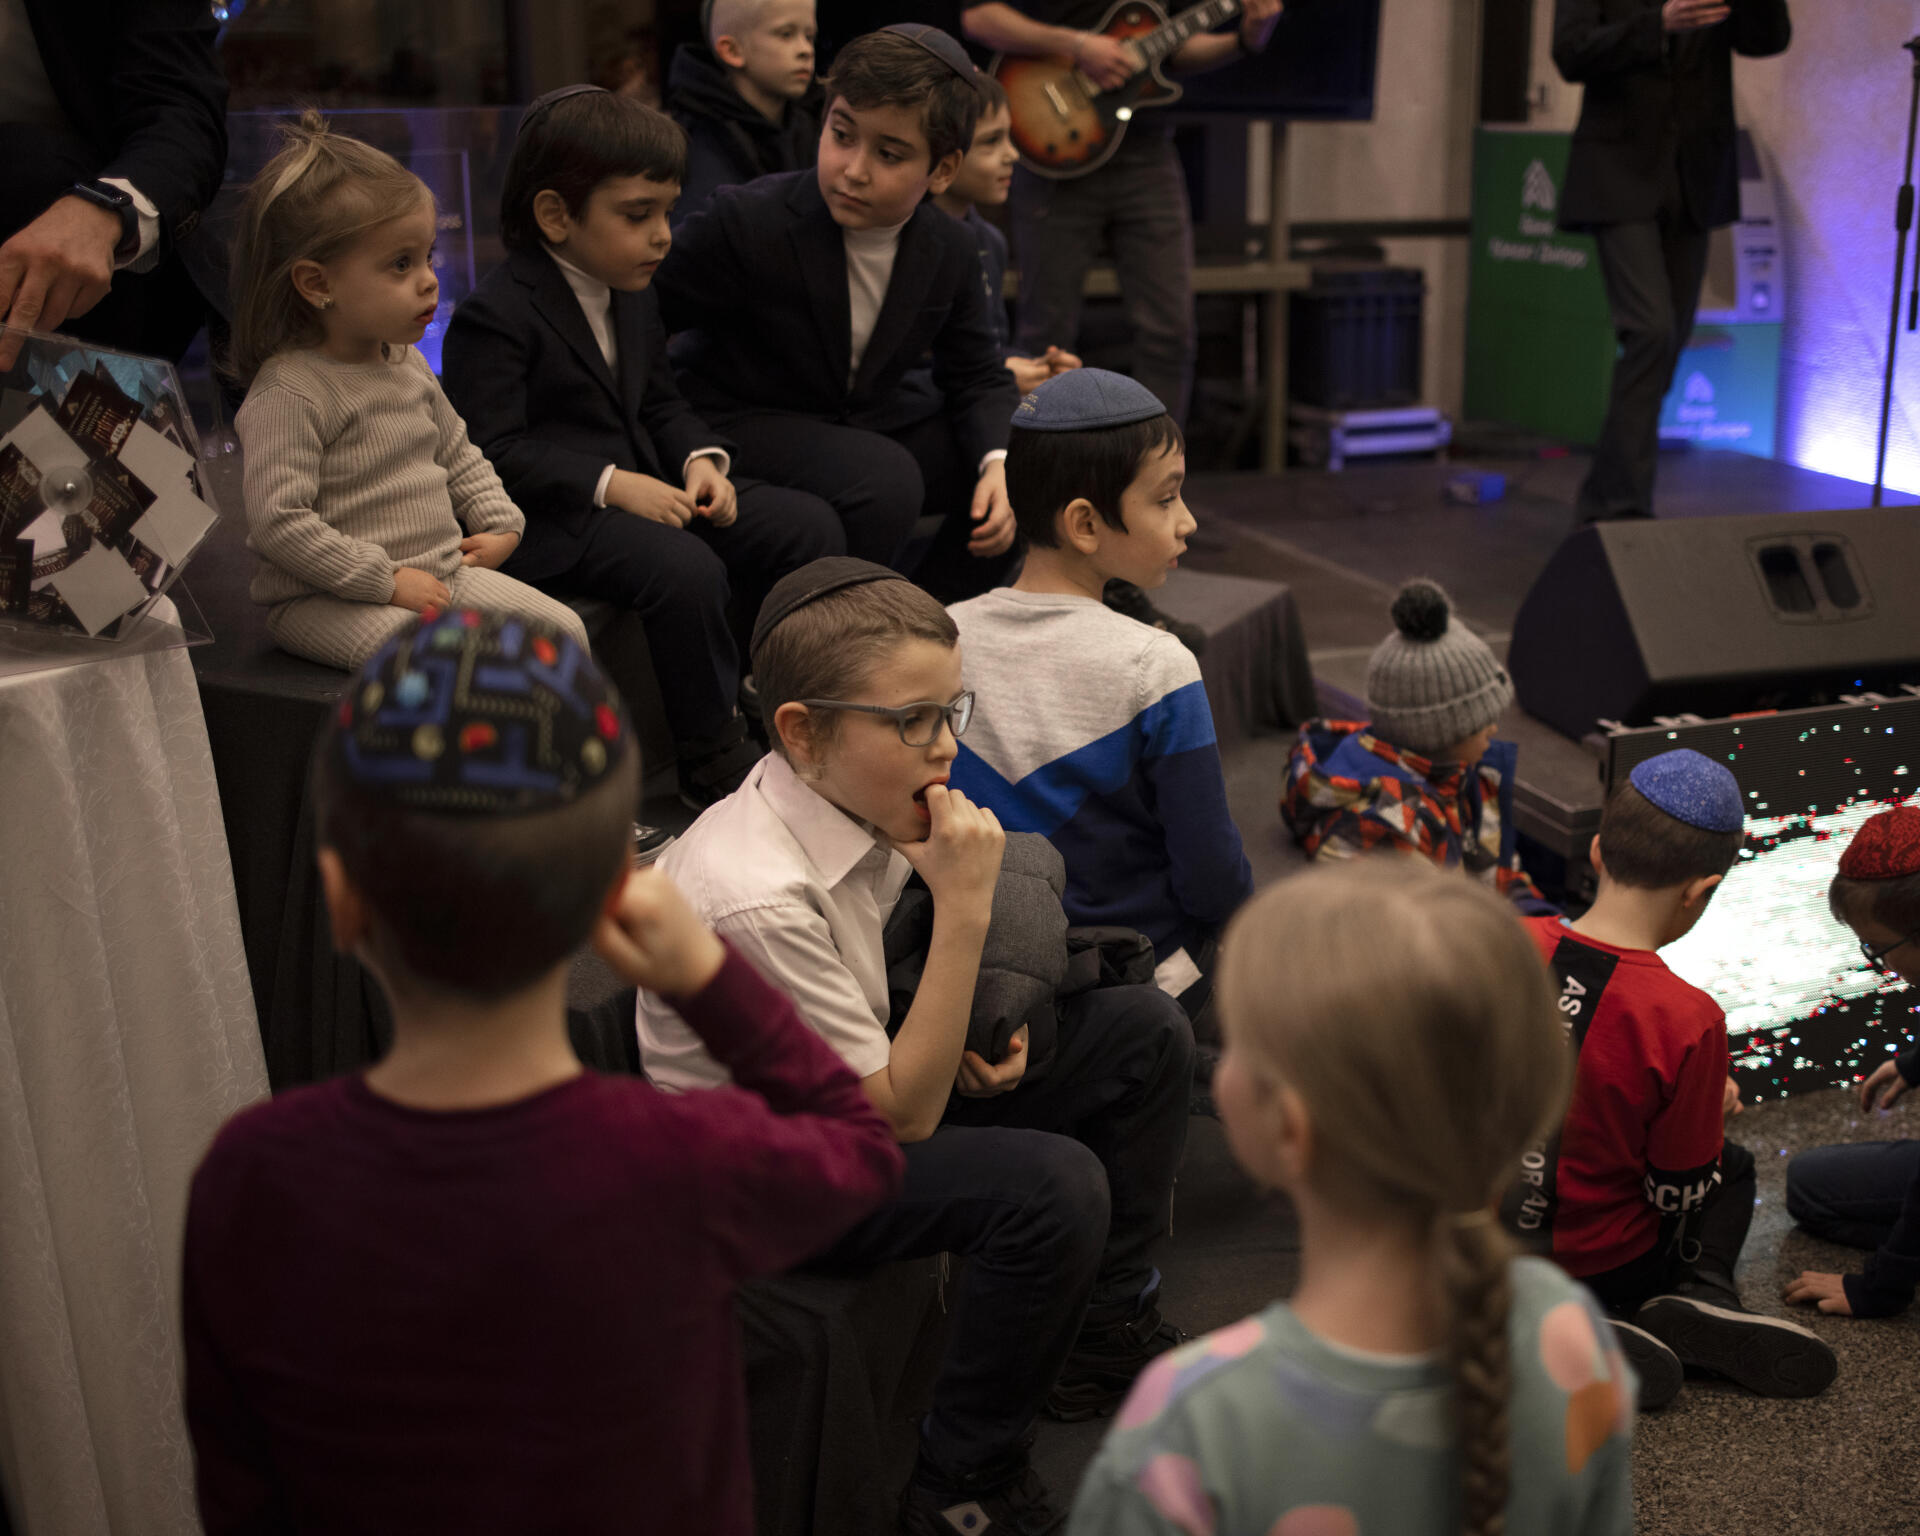 Children from the Jewish community attend the Festivities during Hanukkah celebrations, at the Menorah center in Dnipro, Ukraine, December 10, 2023.